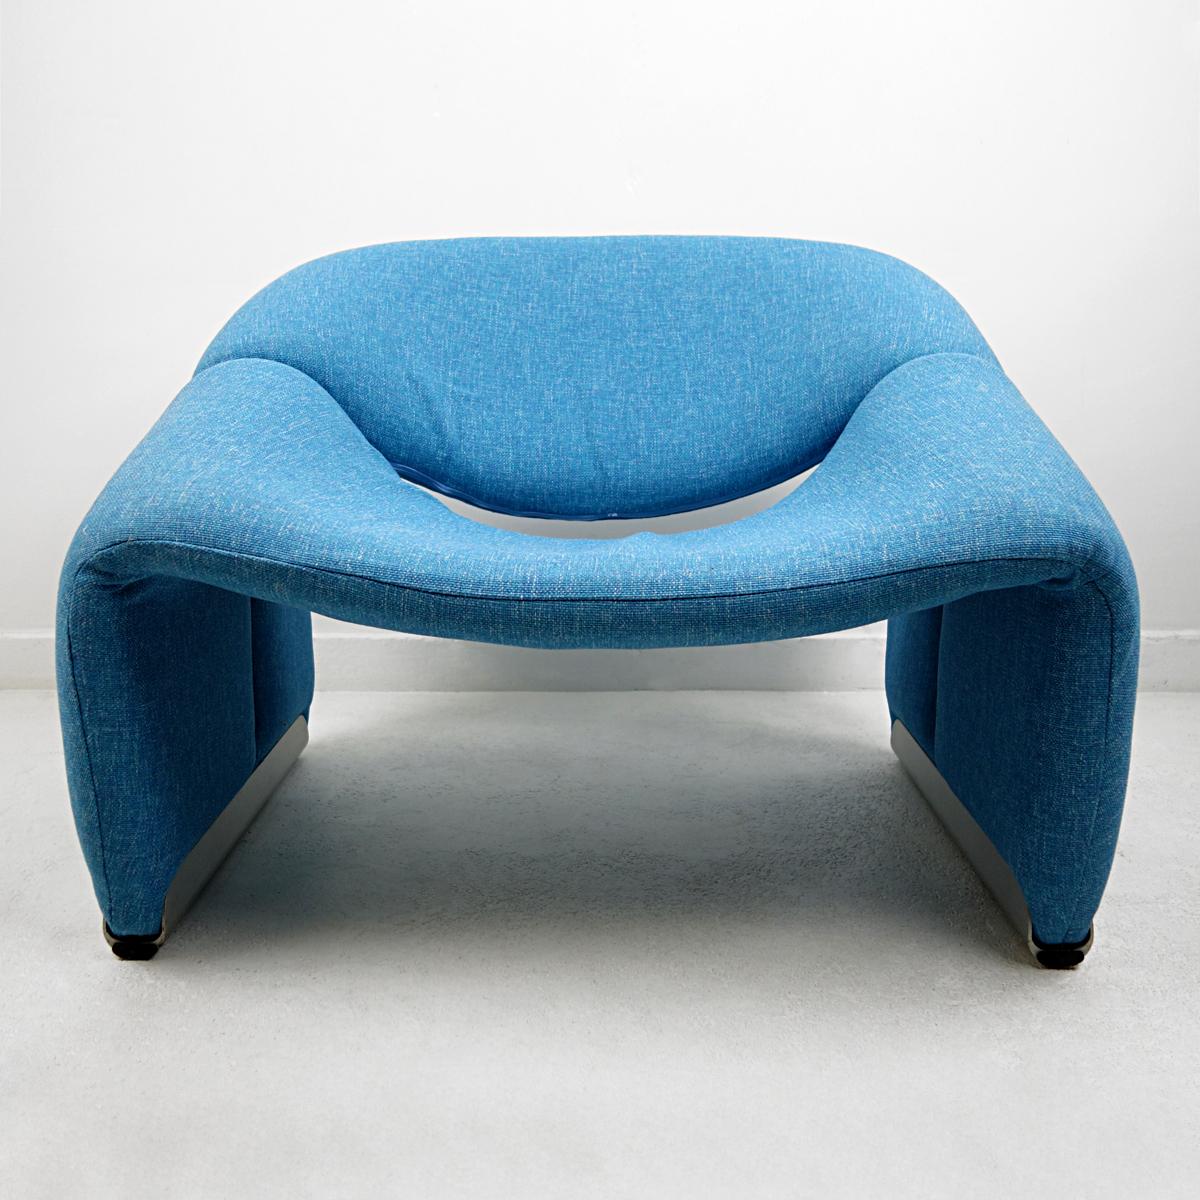 The Groovy chair, or F598, was designed in 1973 by France’s top designer Pierre Paulin for Holland’s most Avant Garde furniture maker Artifort. Their compactness combined with great comfort and of course iconic looks made this chair one of the stars